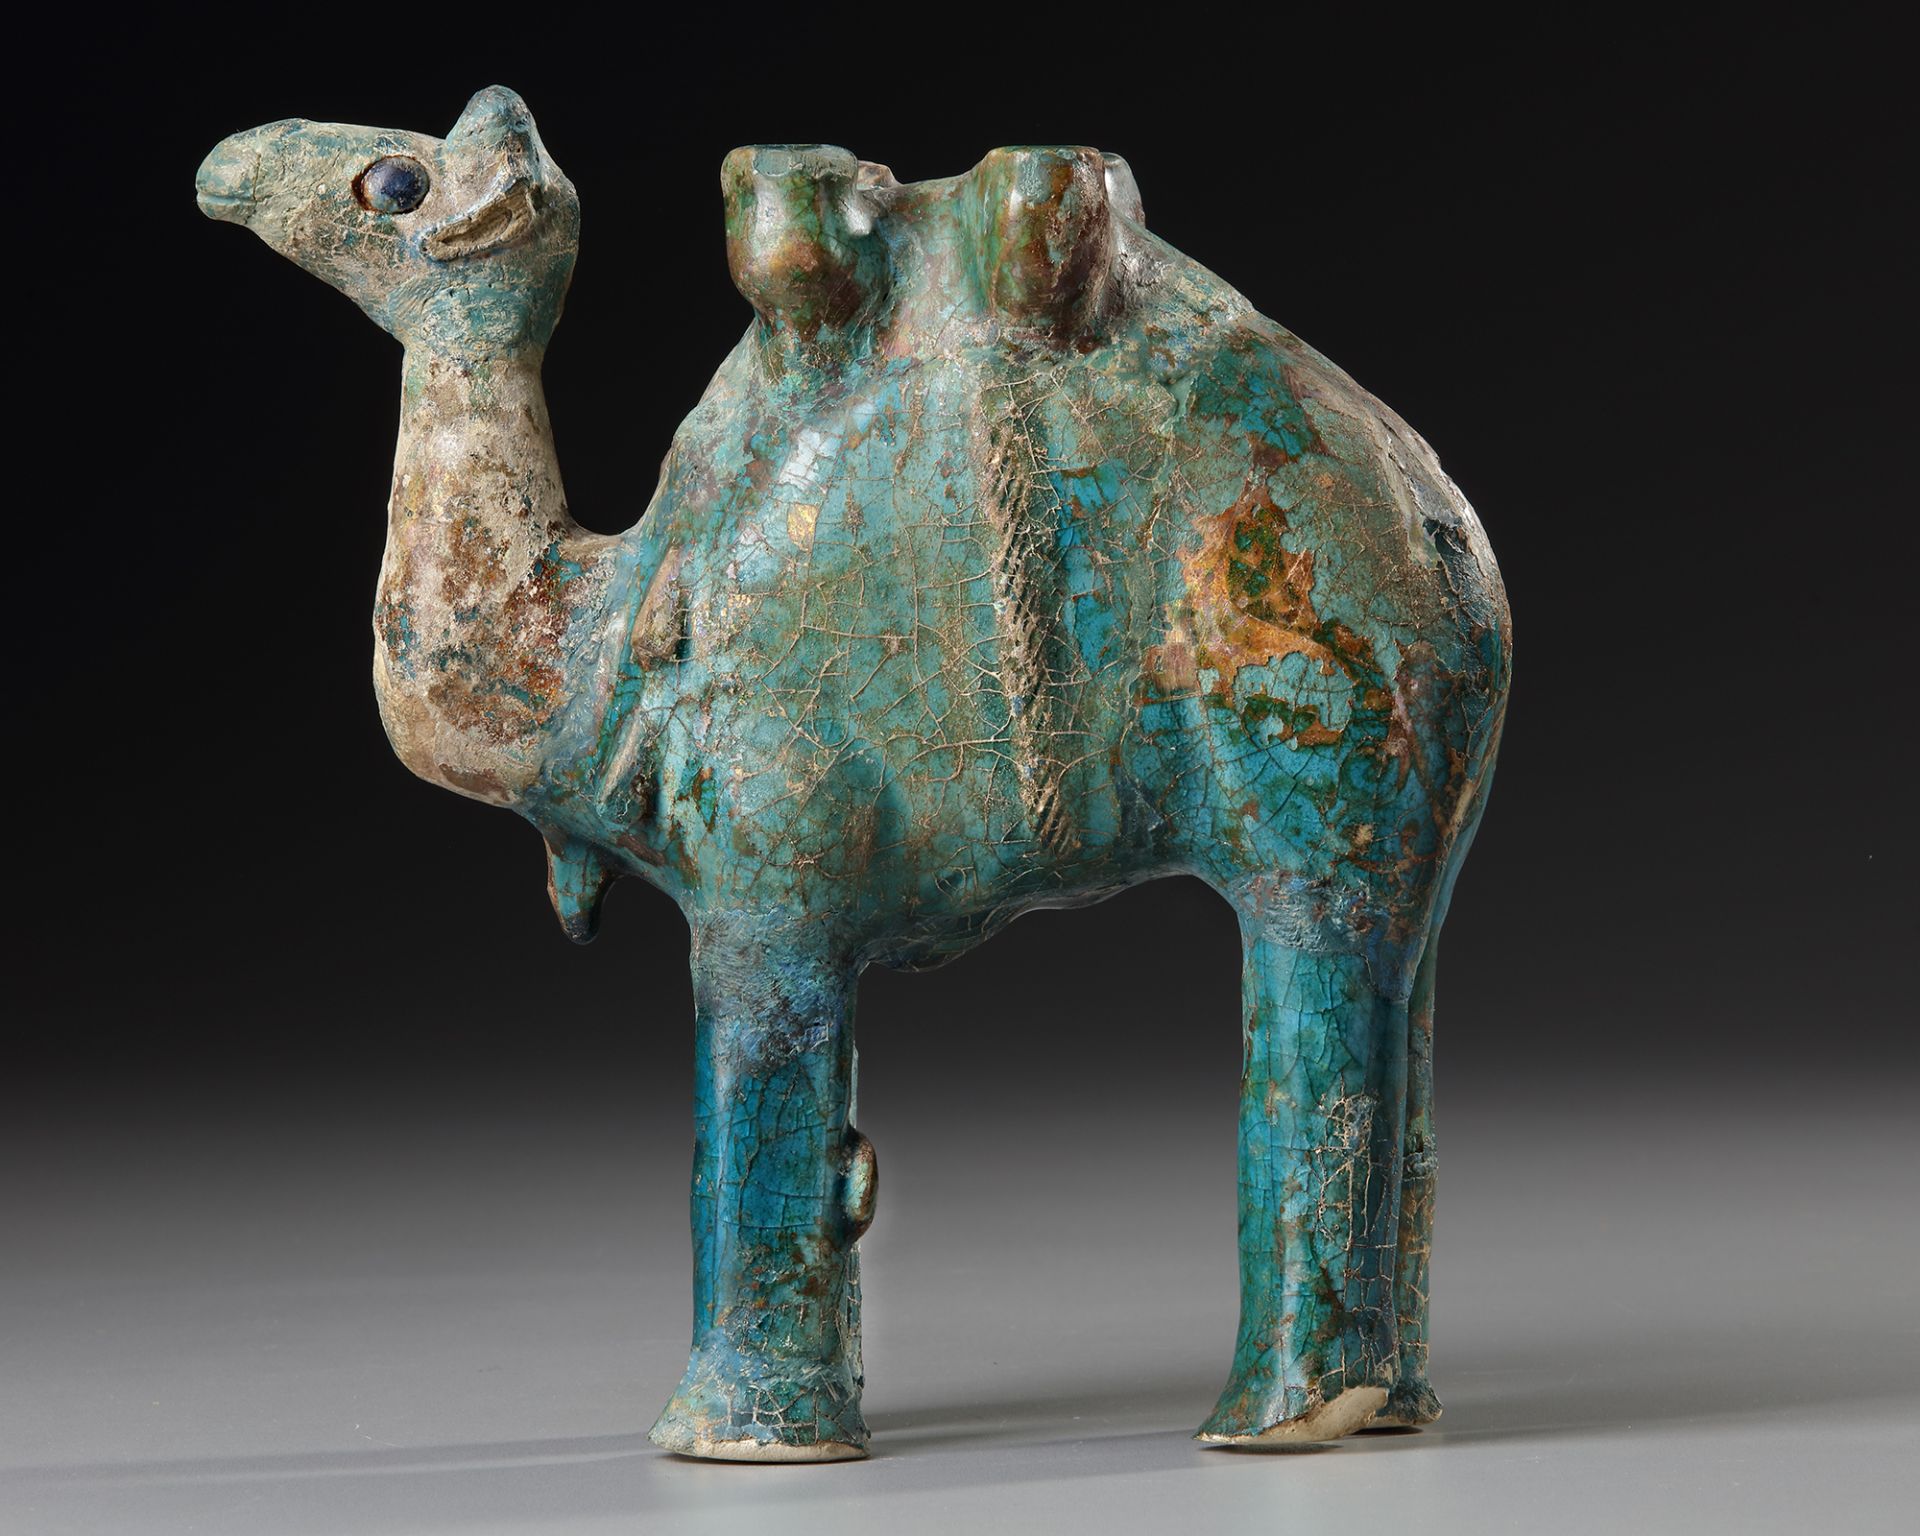 A TURQUOISE GLAZED POTTERY FIGURE OF A CAMEL, KASHAN, PERSIA, 11TH-12TH CENTURY - Image 2 of 4